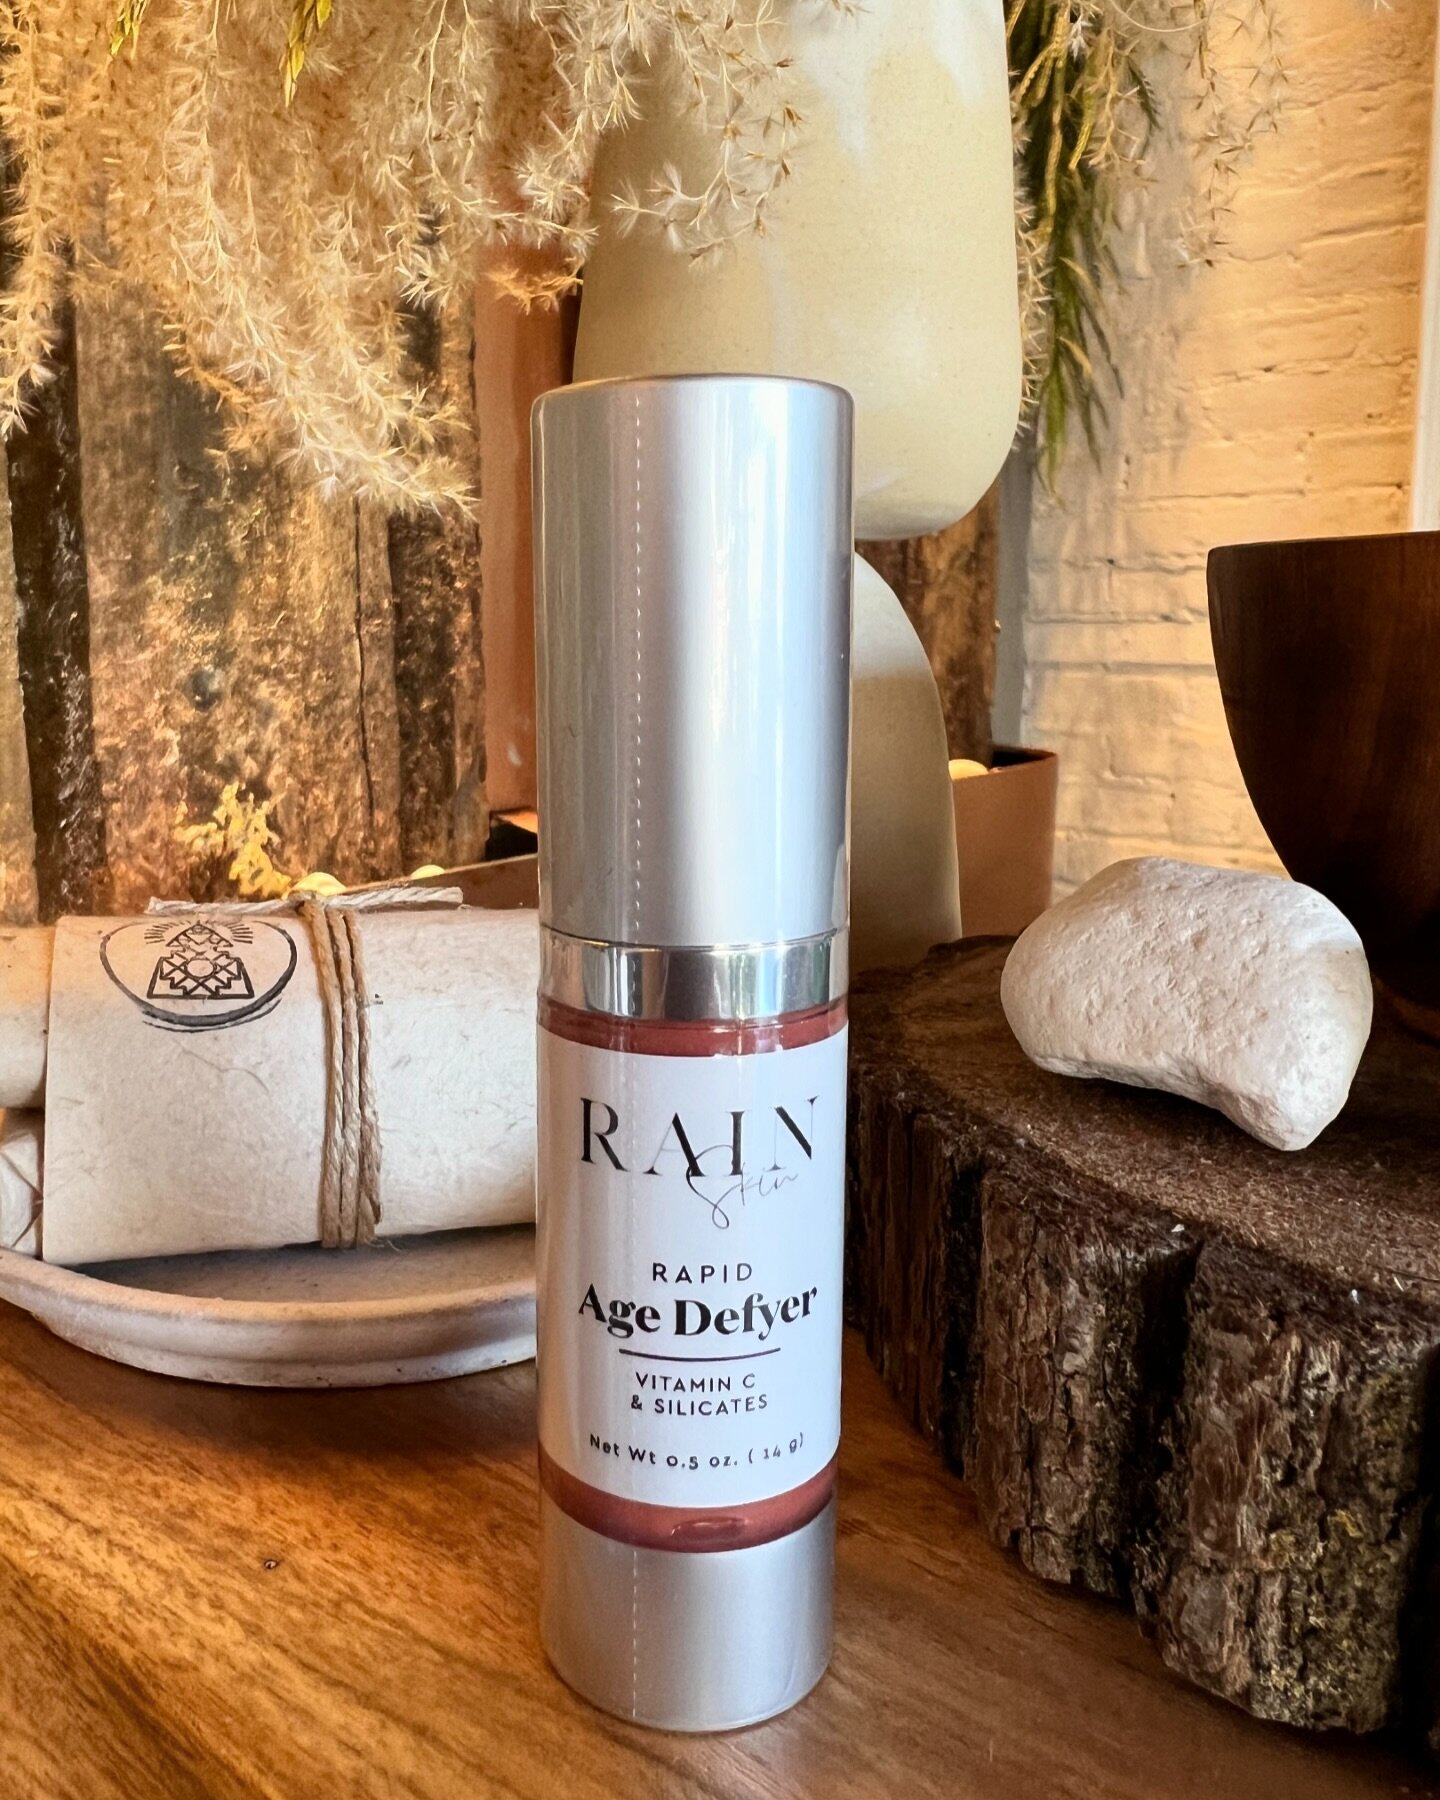 Introducing our incredible rapid age defyer!&nbsp;🌿

Experience the magic as our revolutionary formula works wonders, visibly reducing fine lines, wrinkles, and under-eye bags in just one application. ✨

With powerful ingredients like Sodium Silicat